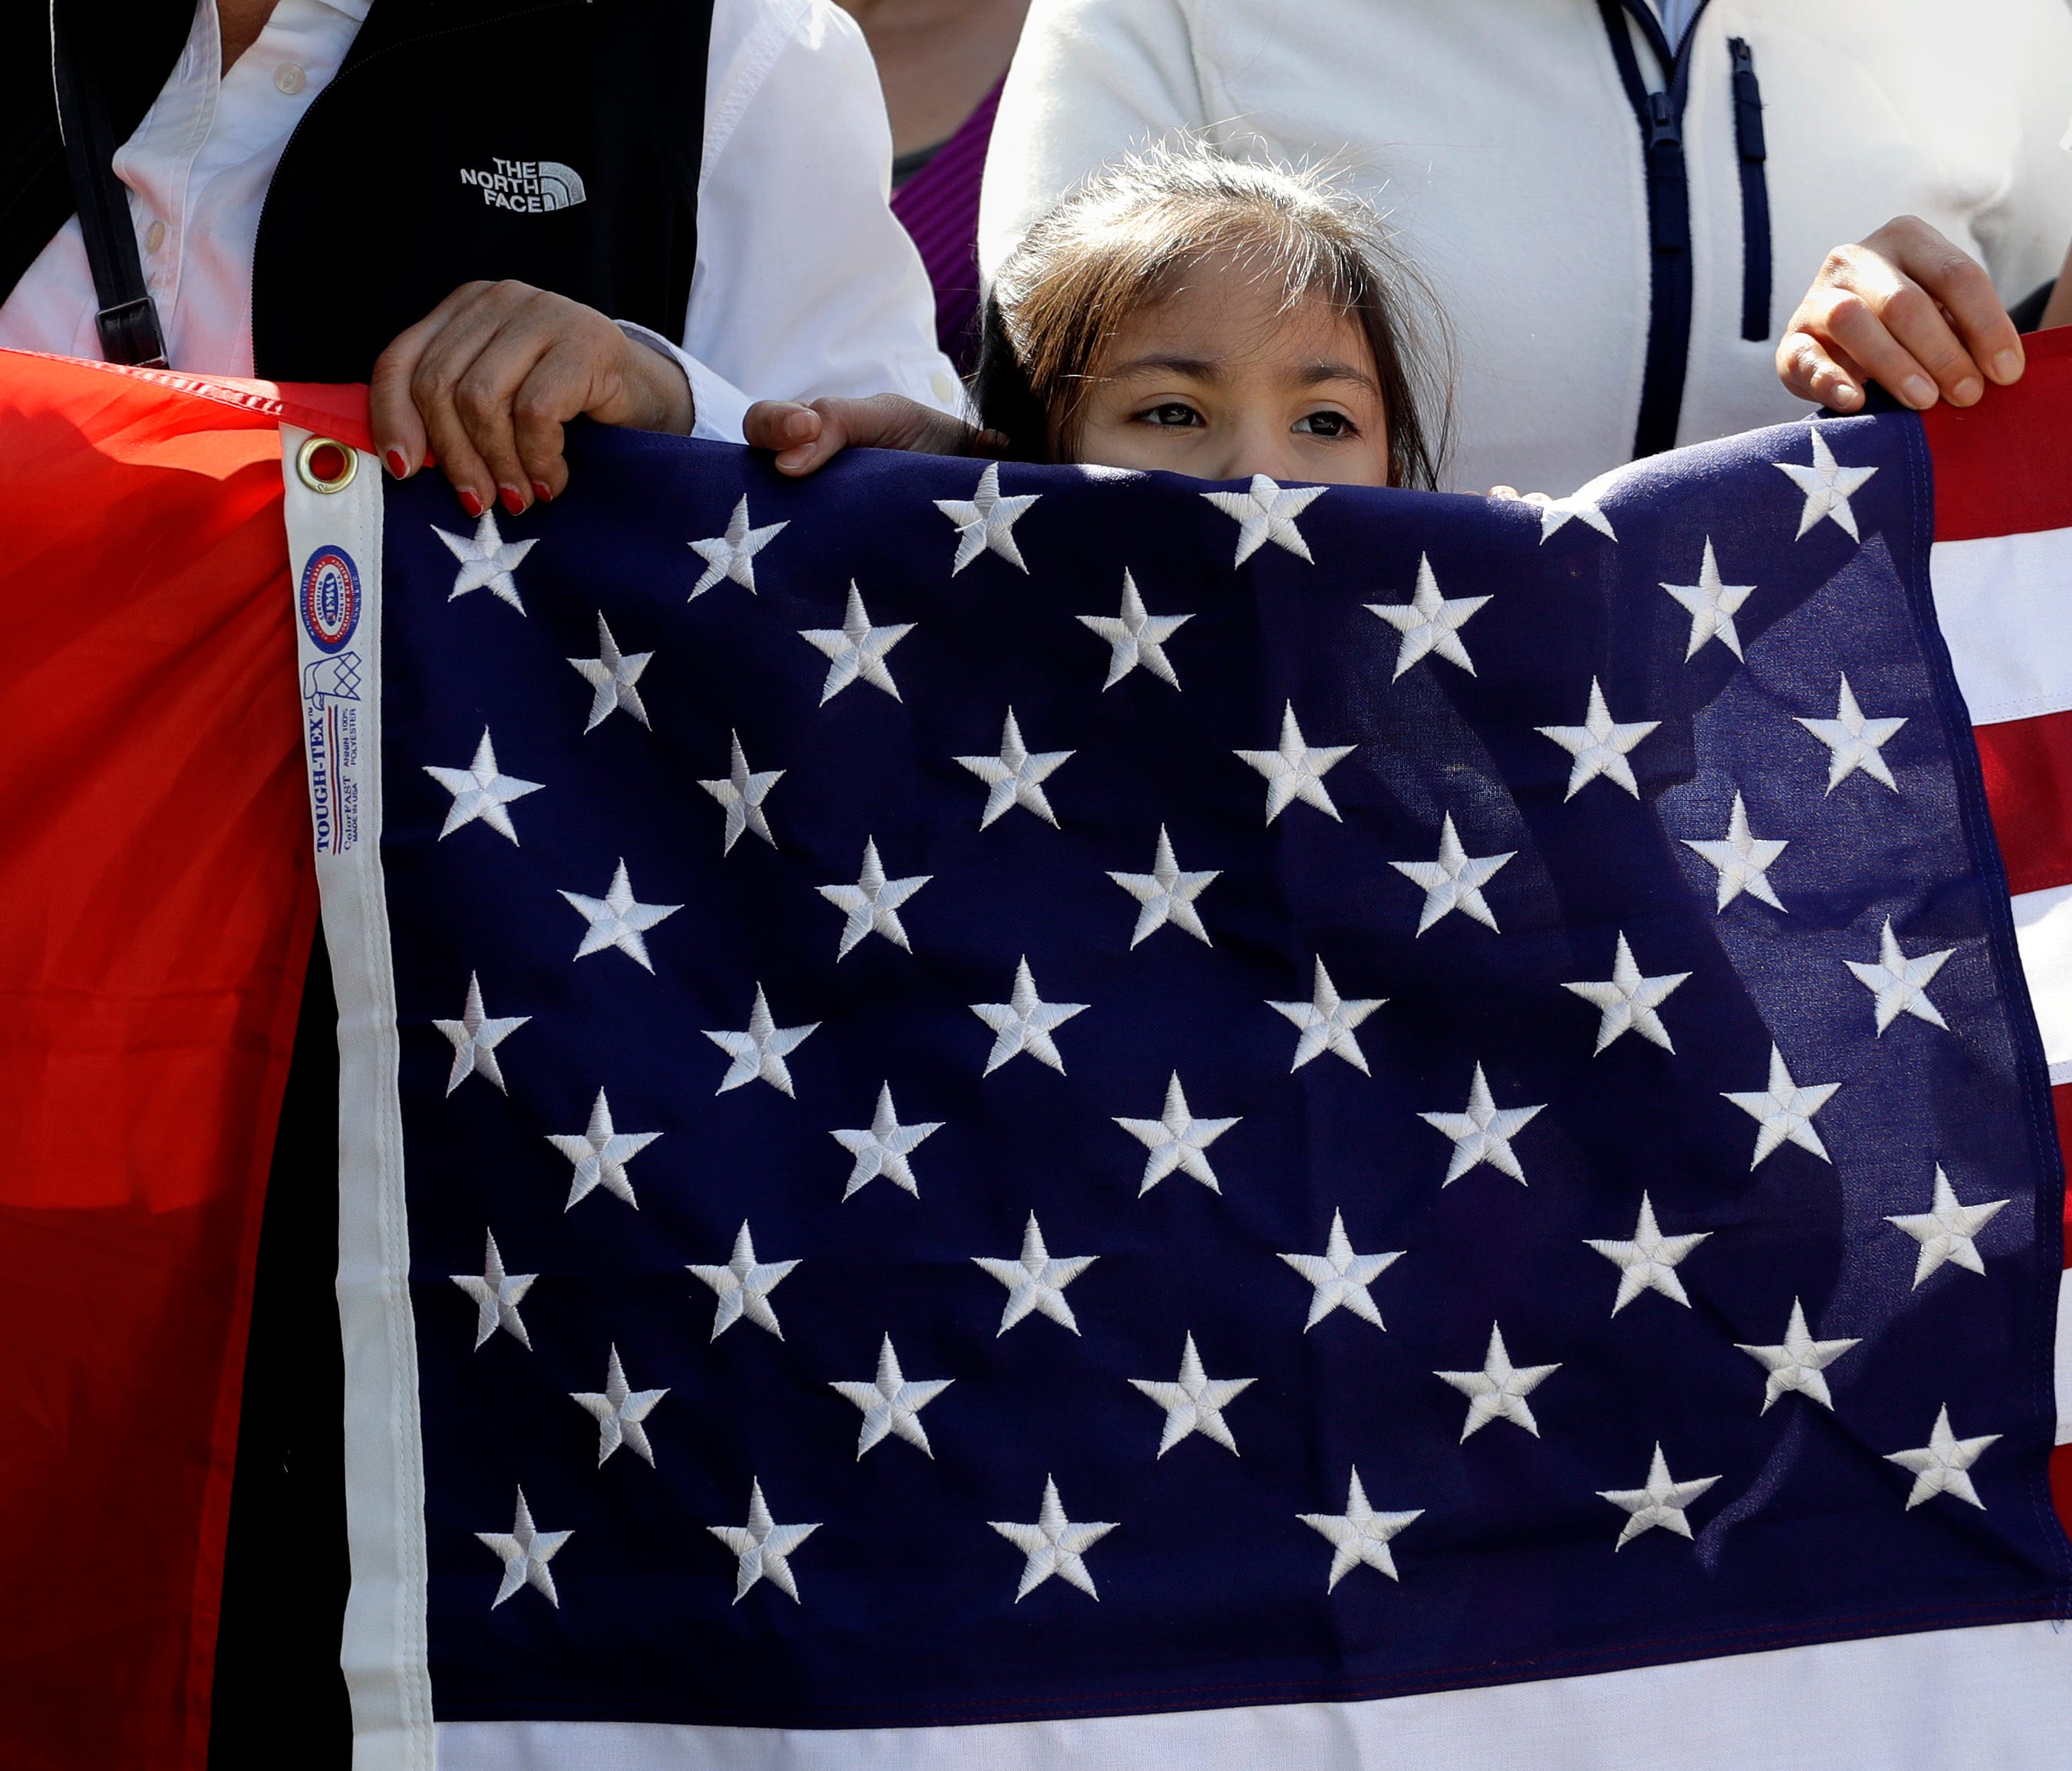 A young girl helps hold a U.S. flag as a group marches through downtown Austin heading to the Texas Capitol during a Day Without Immigrants protest Feb. 16, 2017.